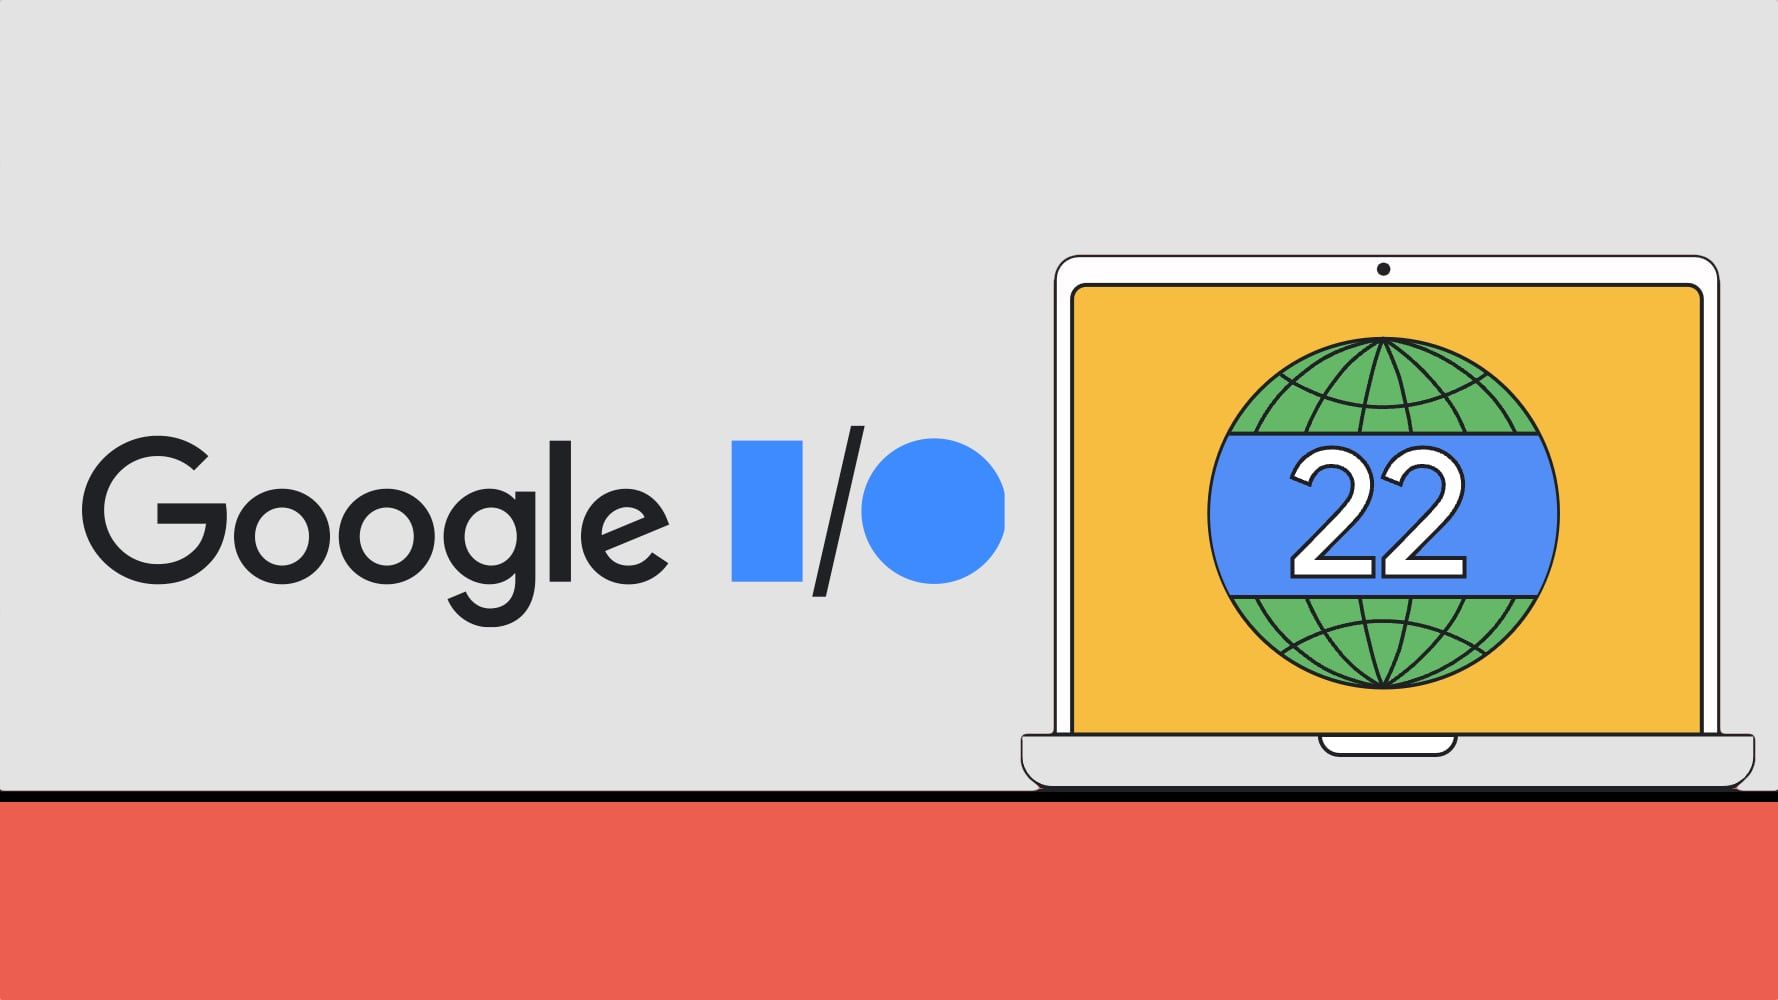 Are you tuning into Google I/O this year?